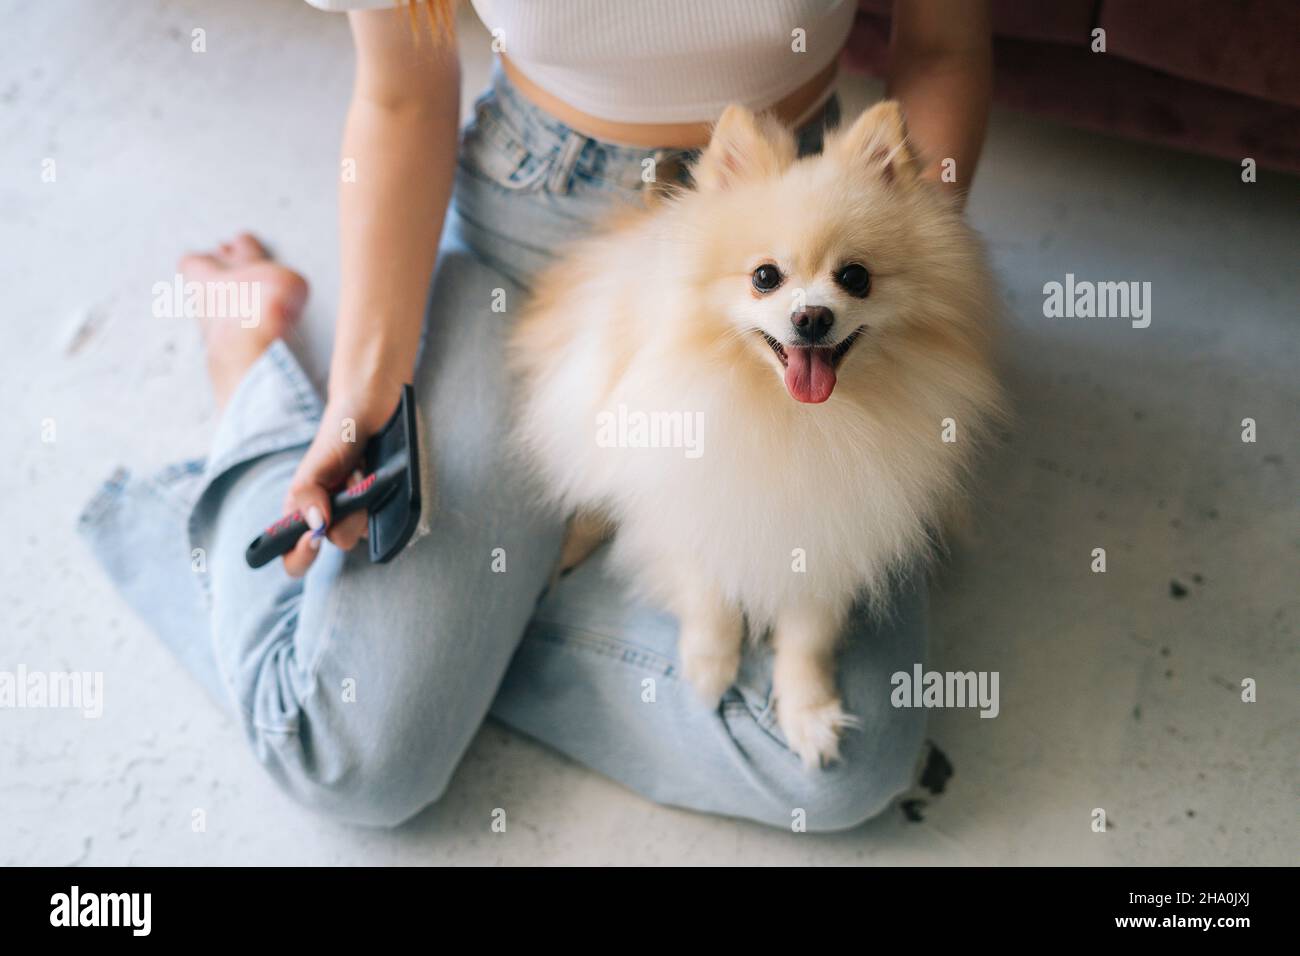 Close-up high-angle view of unrecognizable young woman gently combing pretty white small Spitz pet dog, sitting on floor at home. Stock Photo